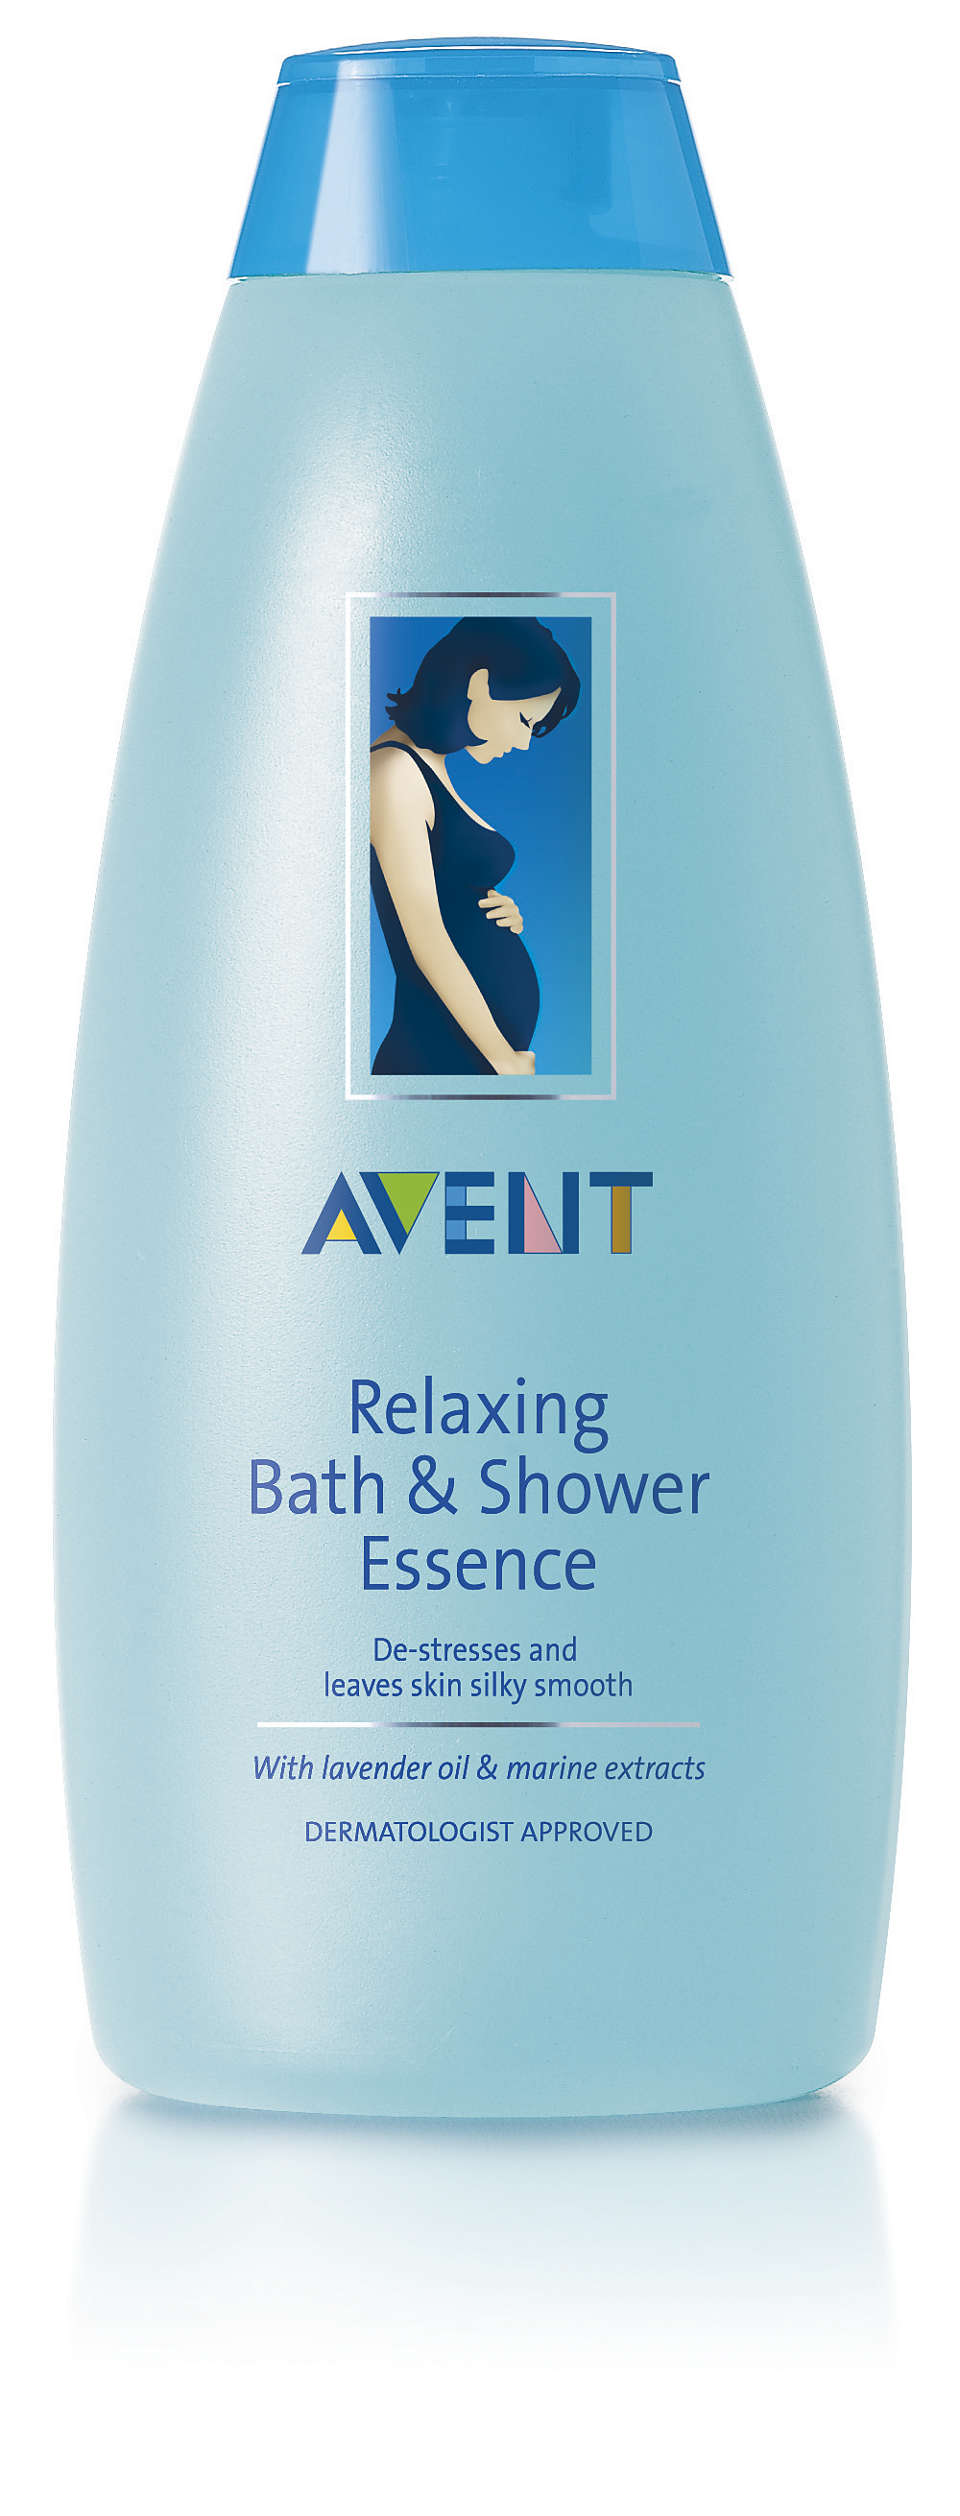 De-stresses and leaves skin silky smooth